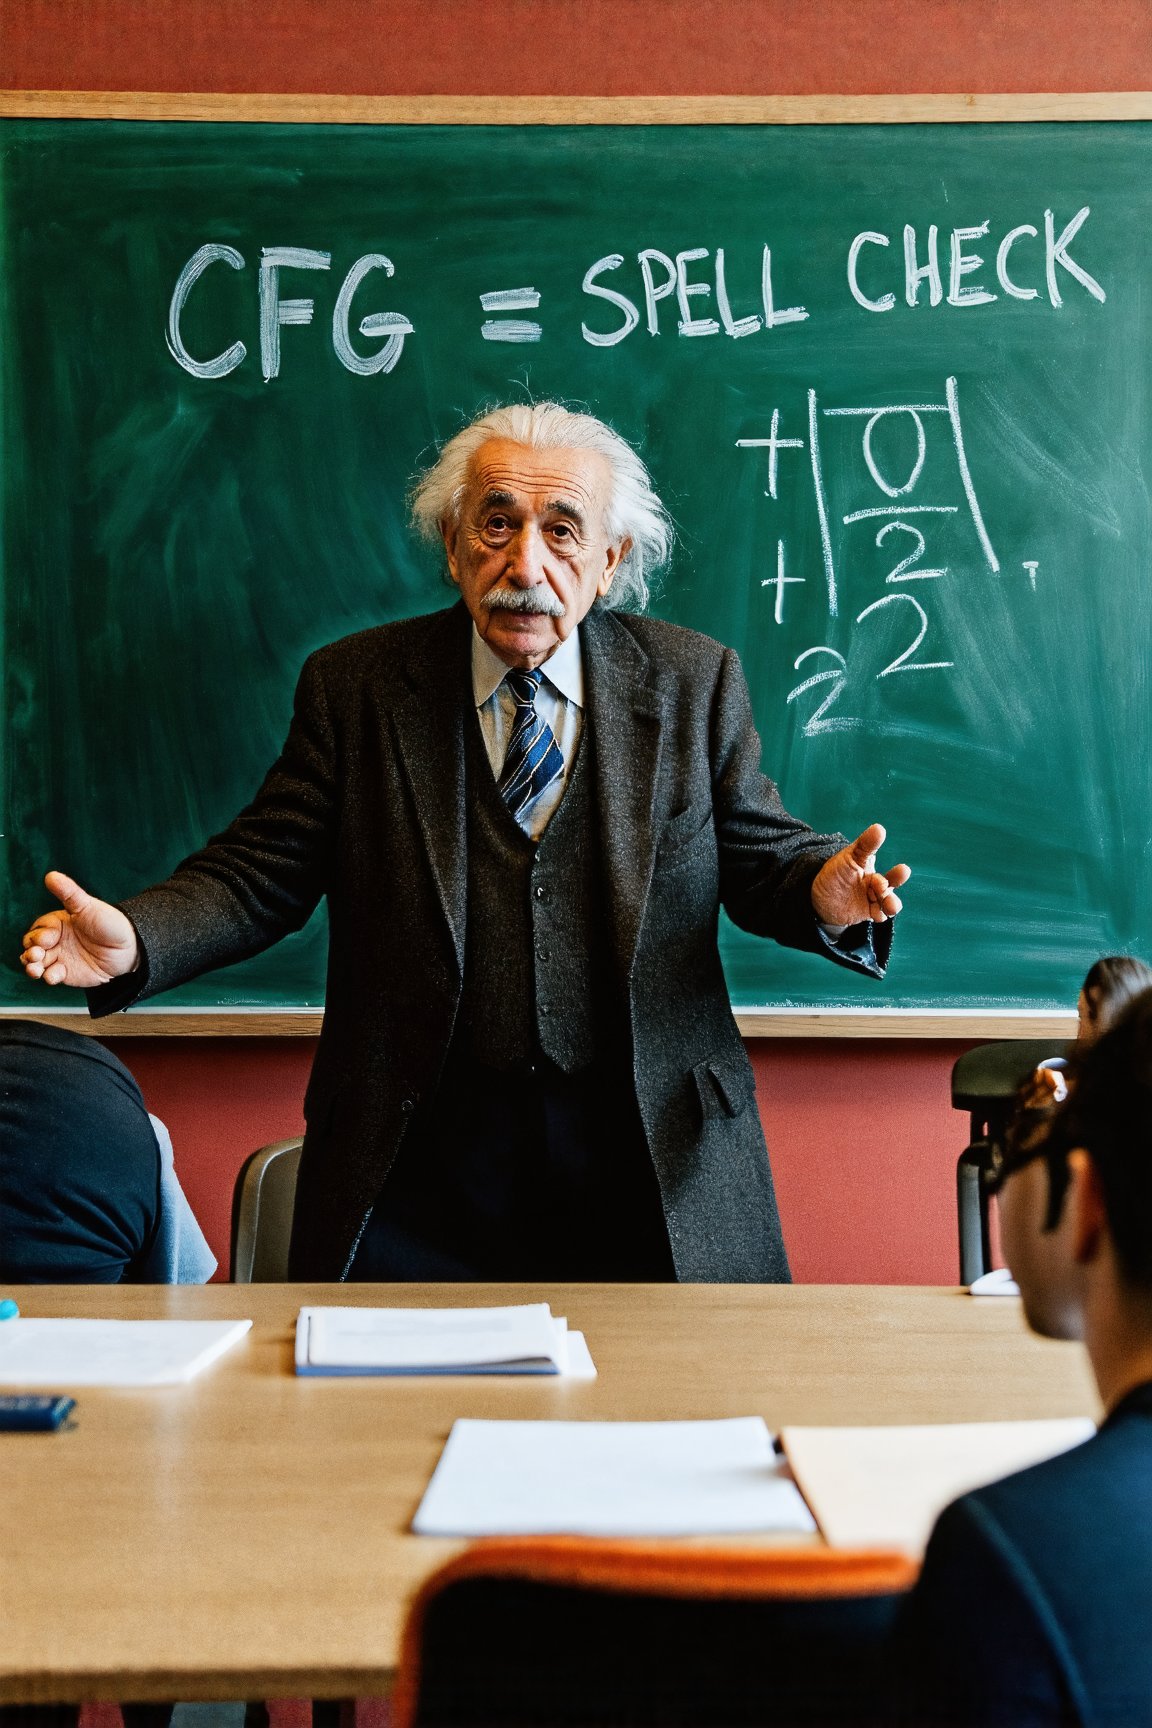 Photo of Albert Einstein teaching class with chalk writing on chalkboard that says "CFG = SPELL CHECK"